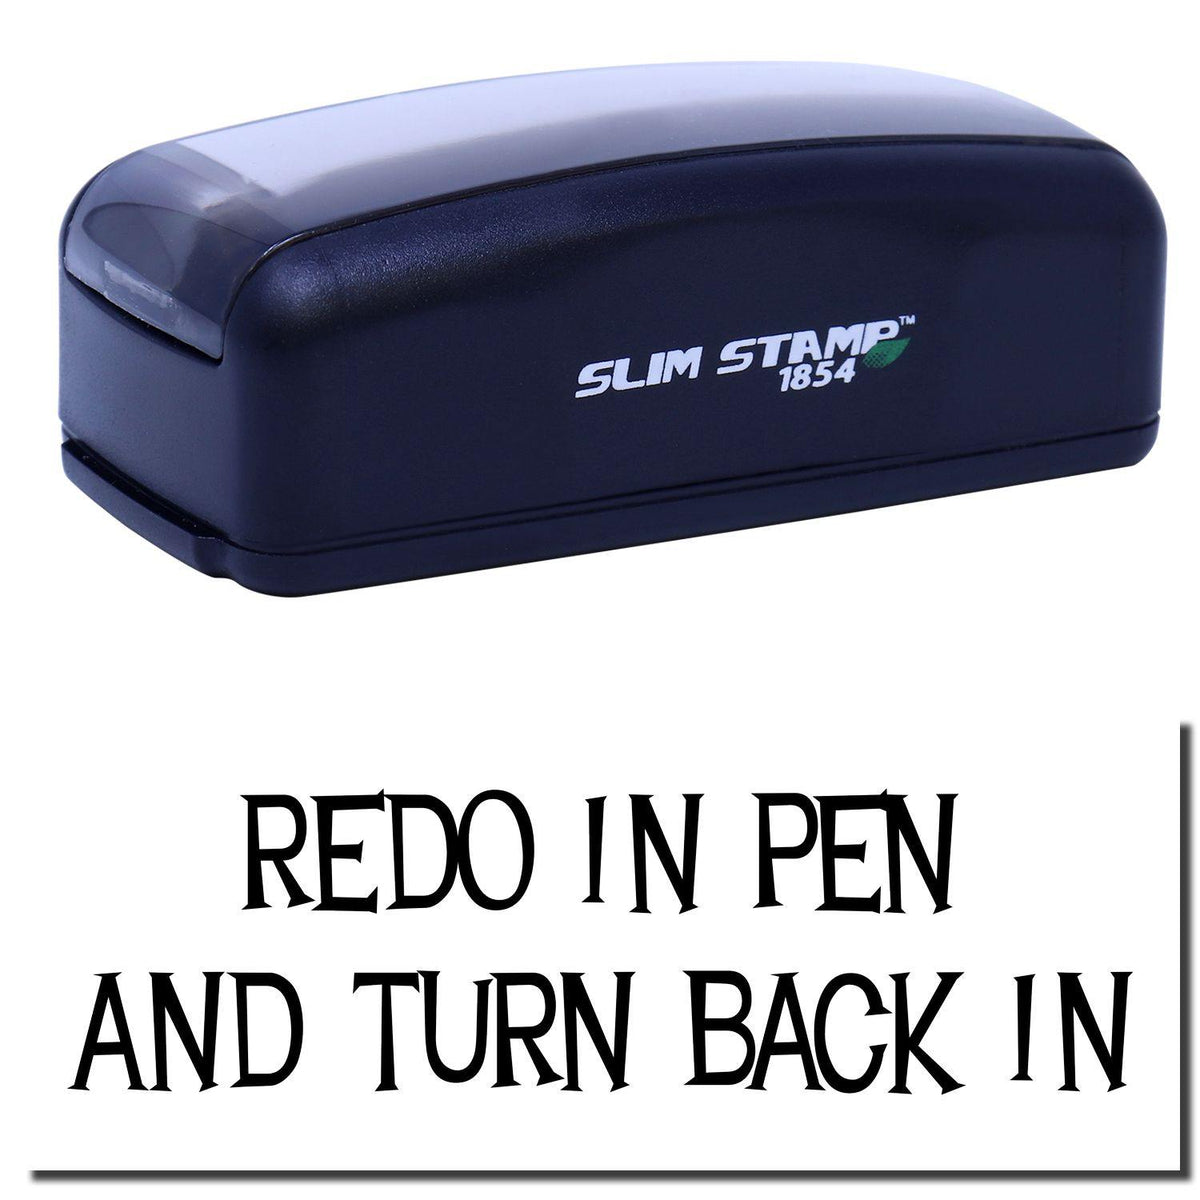 A stock office pre-inked stamp with a stamped image showing how the text &quot;REDO IN PEN AND TURN BACK IN&quot; in a large font is displayed after stamping.